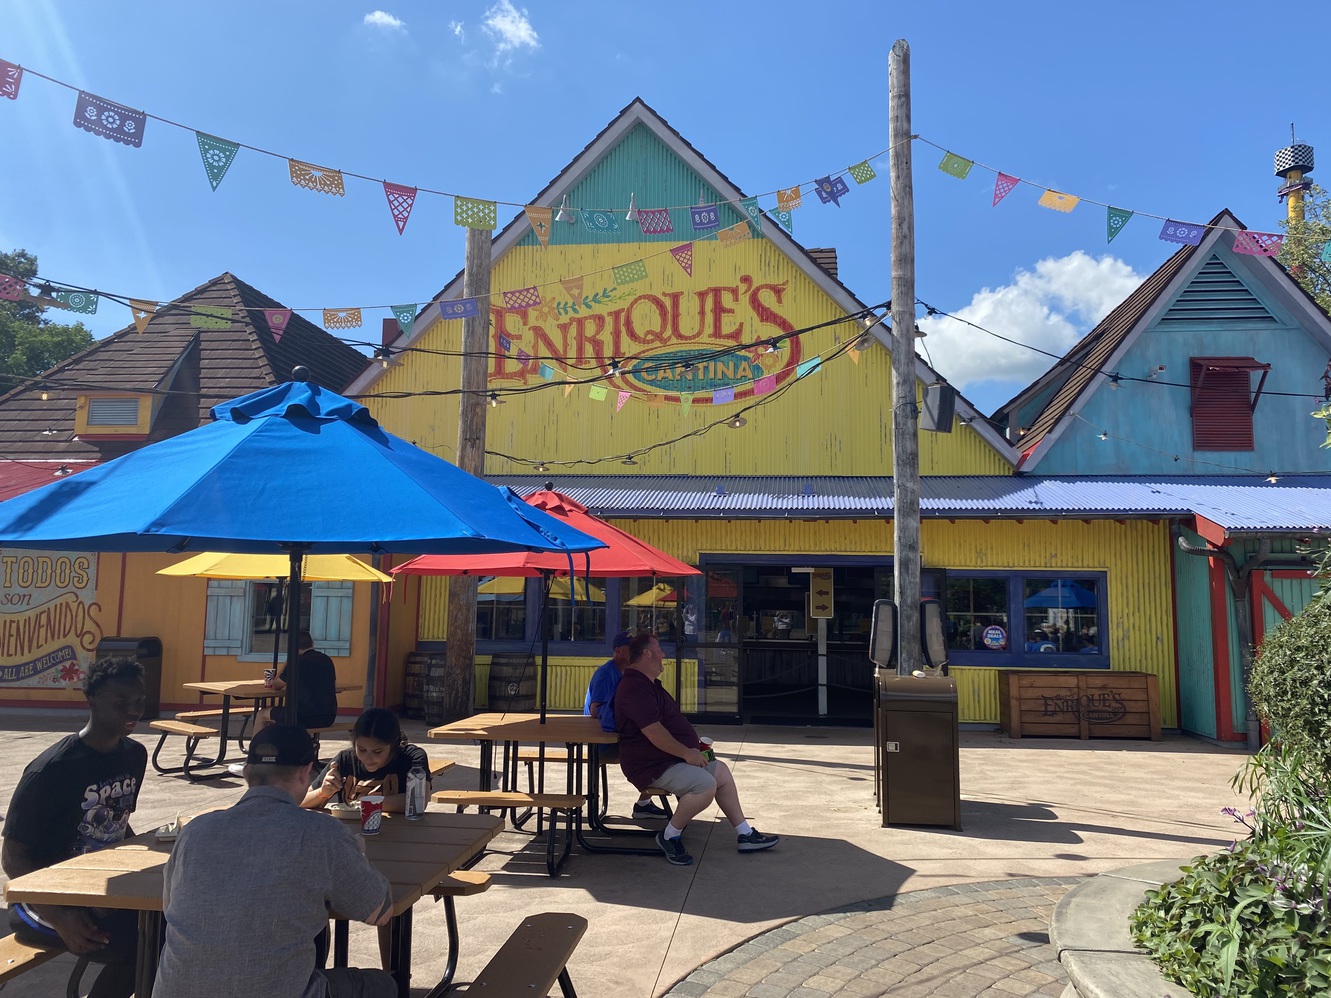 This
      is Enrique's cantina in Adventure Port.